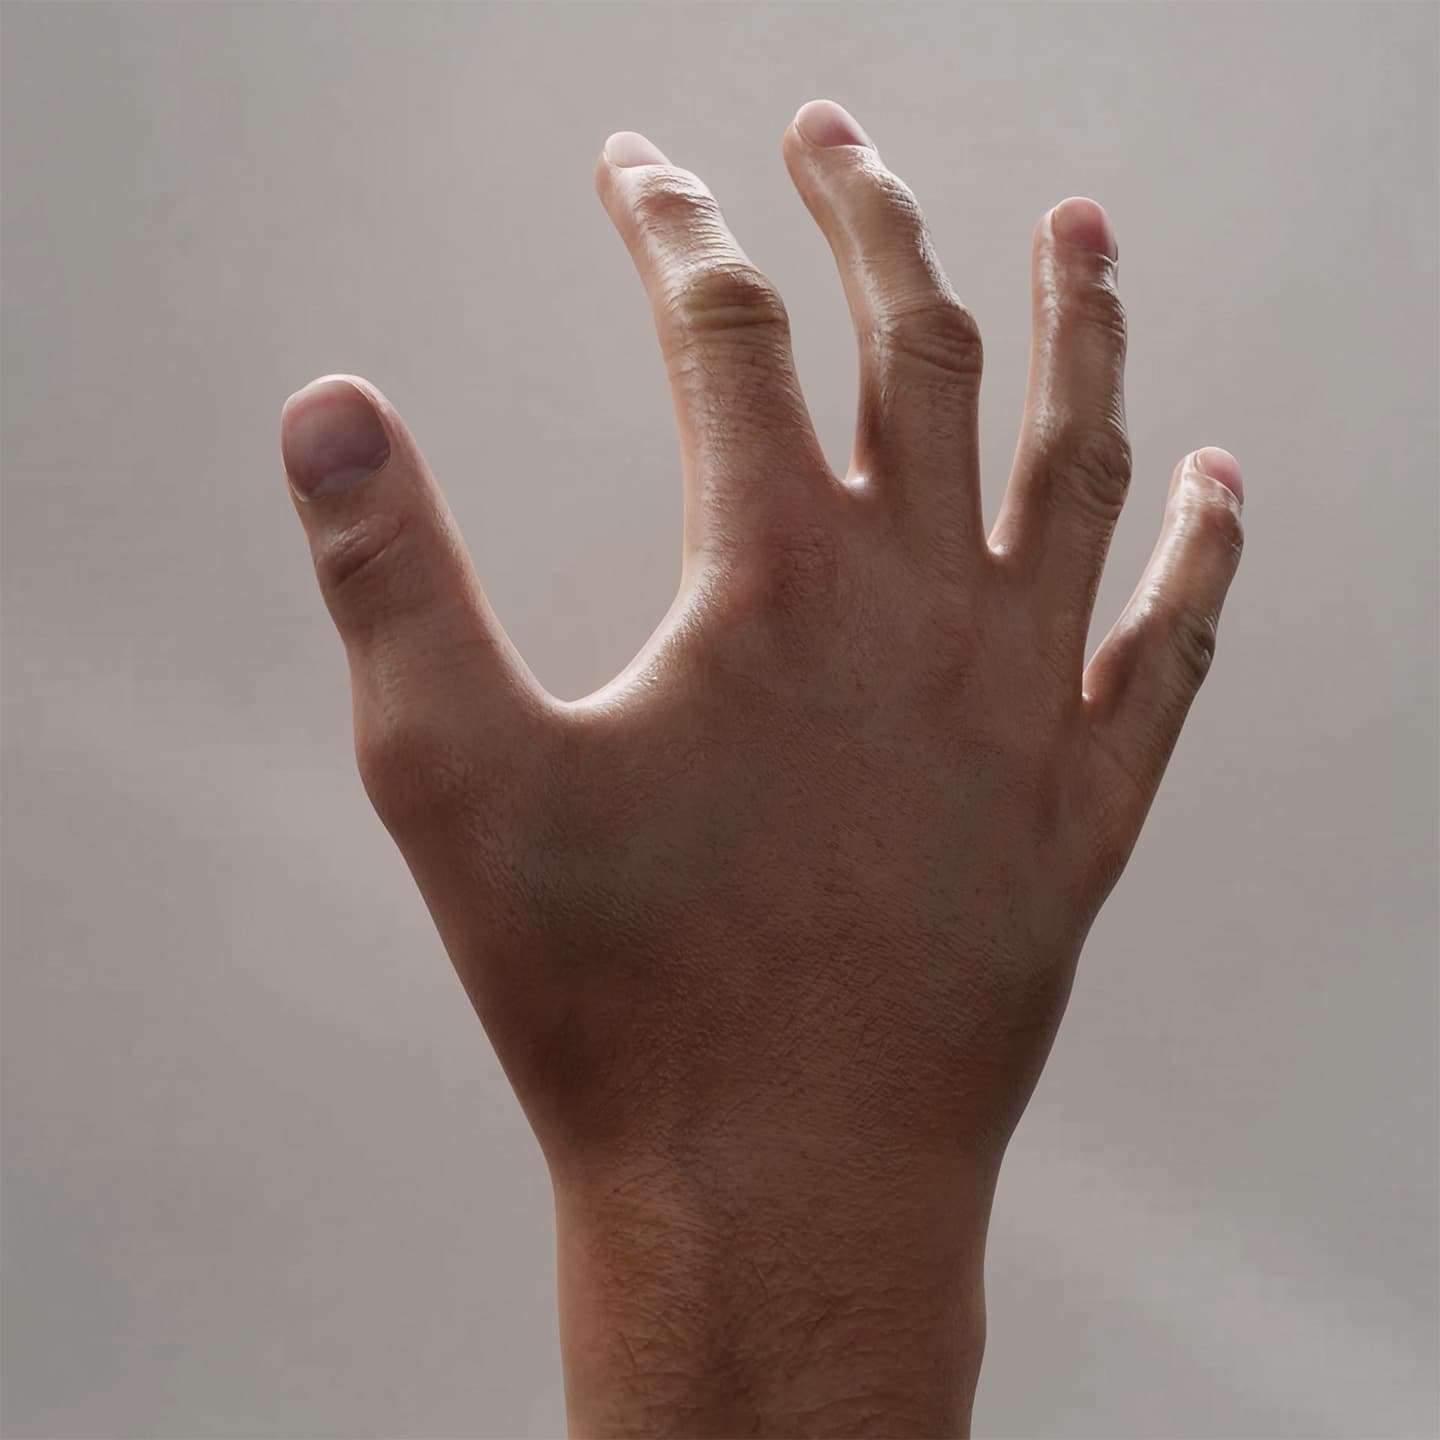 CGI image of a hand with a gray background